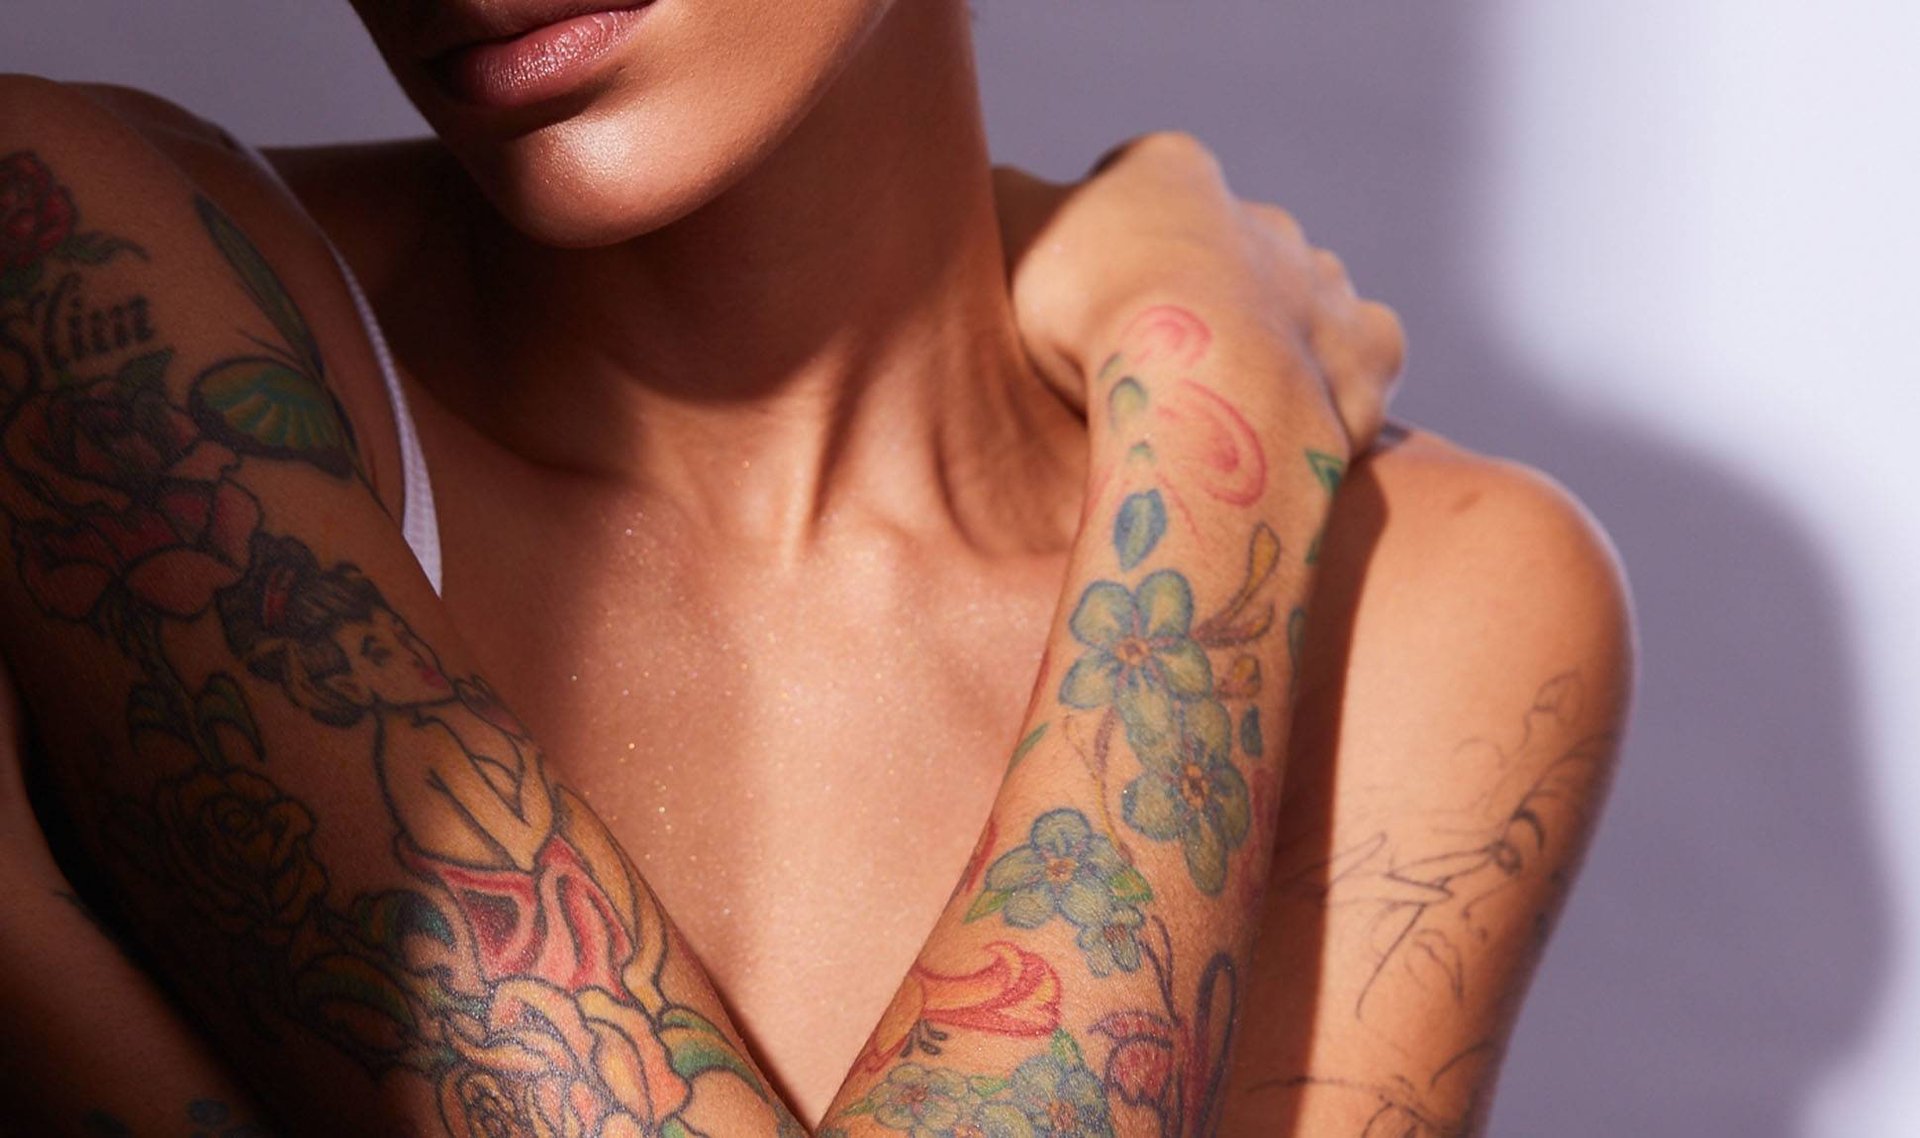 Tattoo Wraps: Is Dry Healing or Wrap Healing Better? 